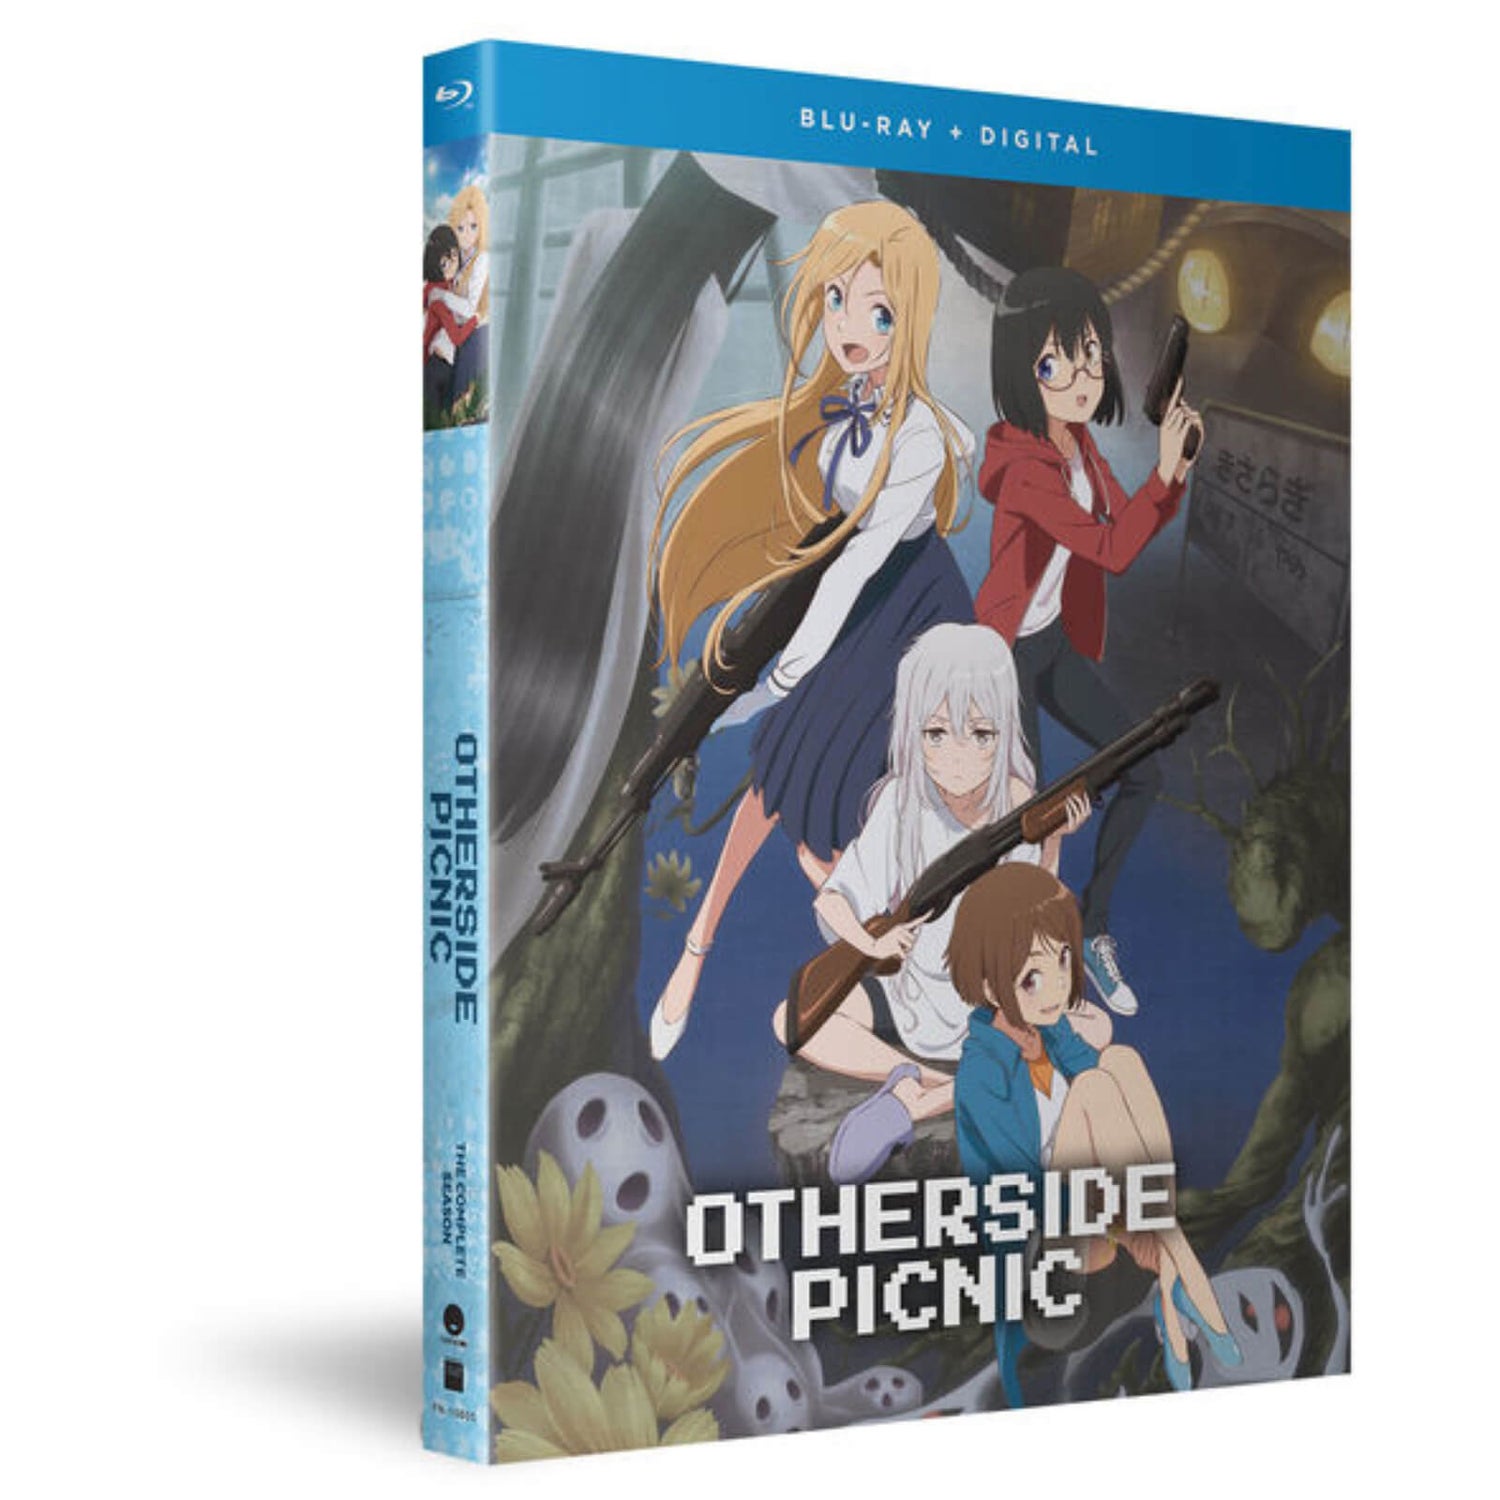 Otherside Picnic: The Complete Season (US Import)